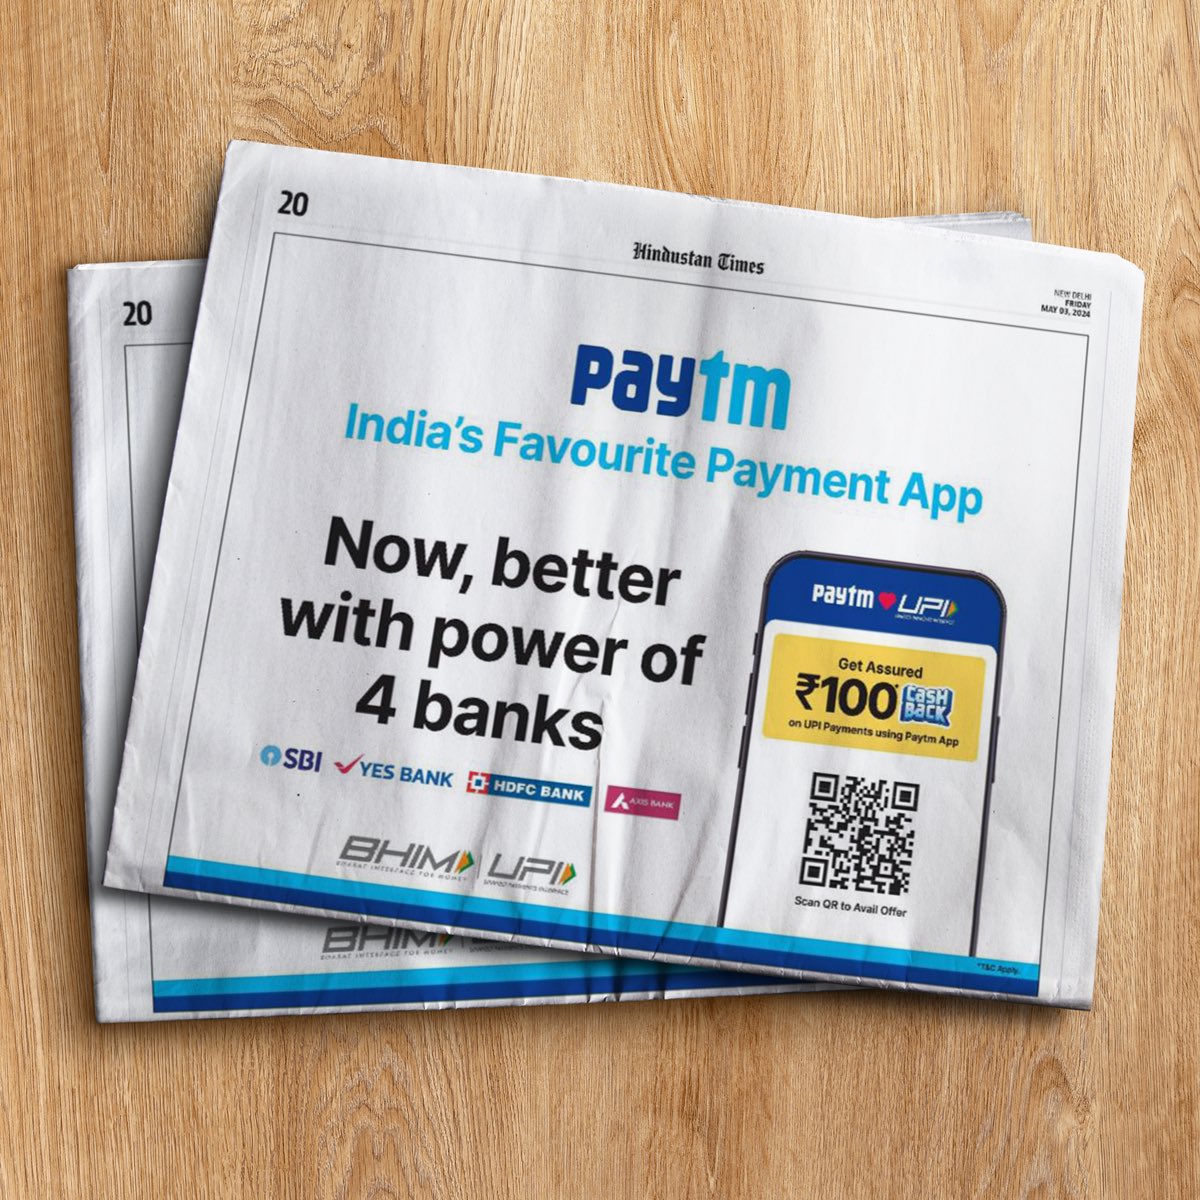 #Paytm is India’s favourite payment app! 🚀 Now, better with power of 4 banks 

Get assured Rs 100 cashback on UPI payments using Paytm app. Download now: p.paytm.me/xCTH/Paytmkaro 

#PaytmKaro @YESBANK @AxisBank @HDFC_Bank @TheOfficialSBI